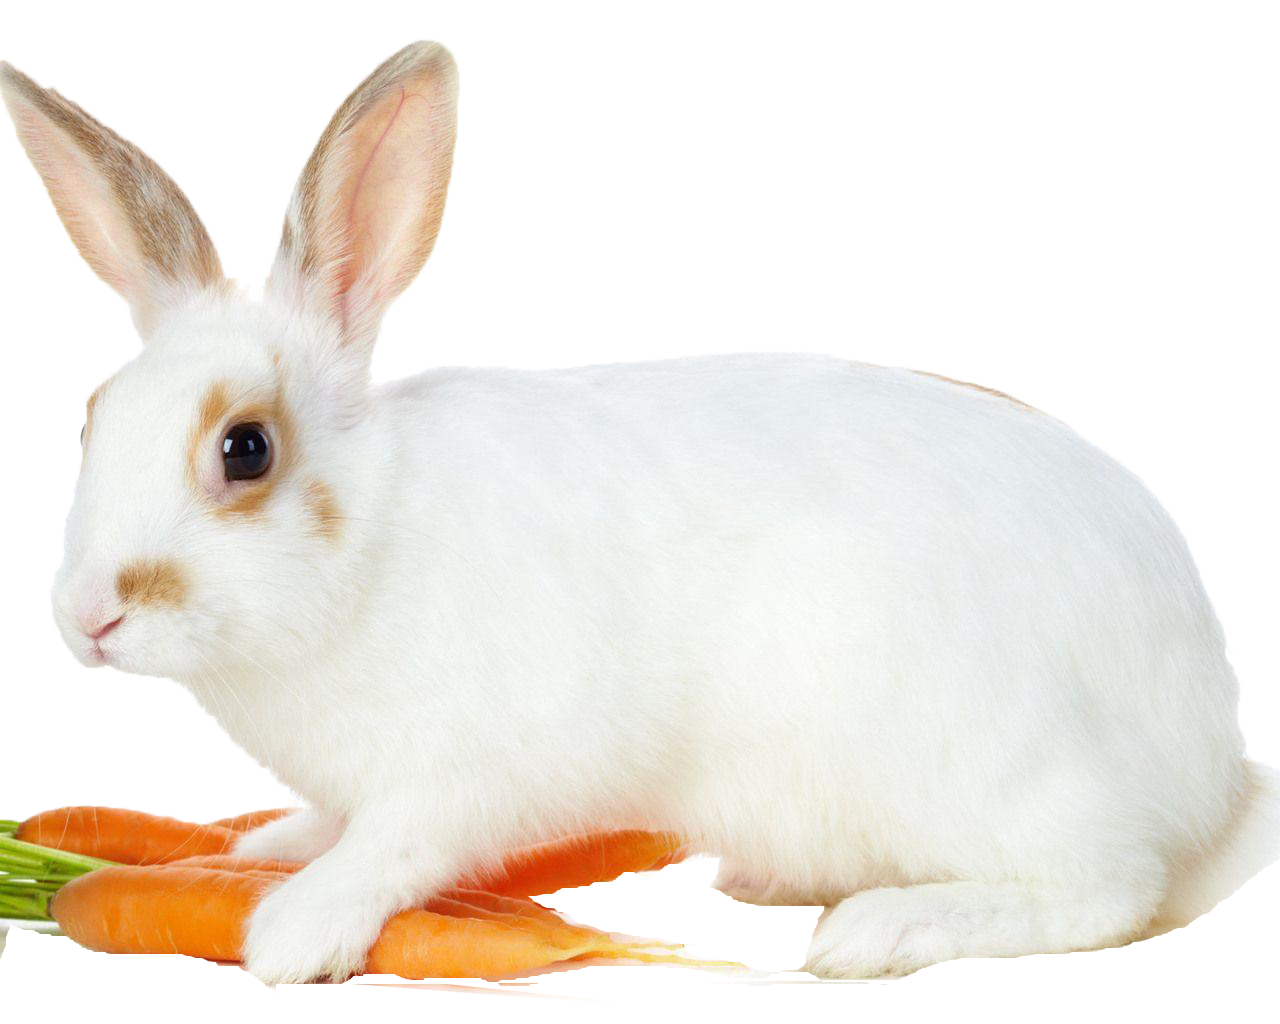 White Rabbit With Carrots.png PNG image